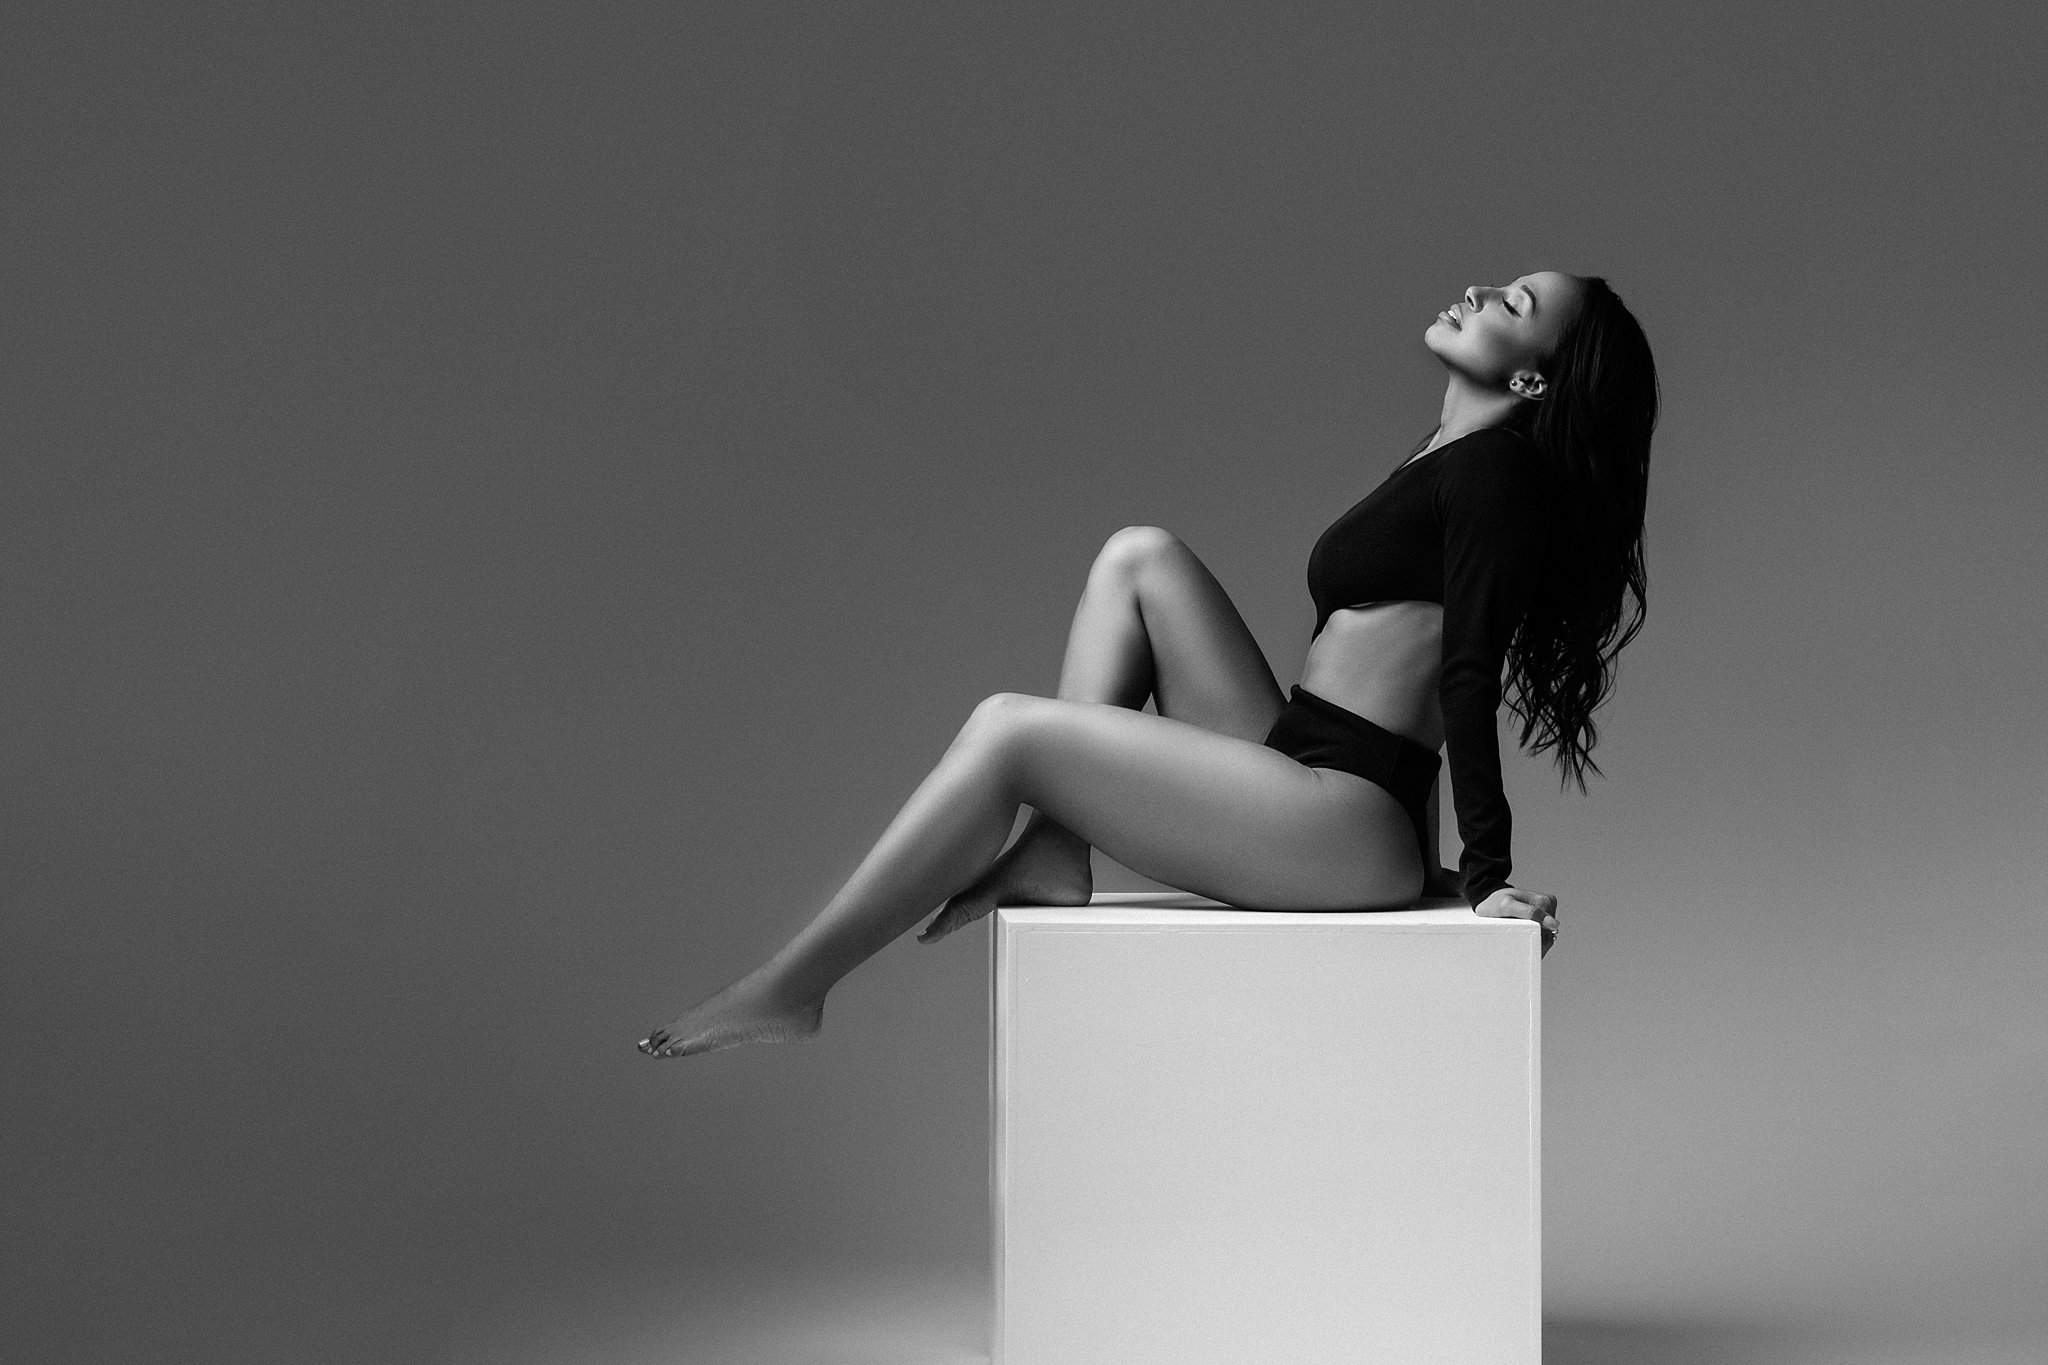 A woman in black lingerie sits on a white cube in a studio